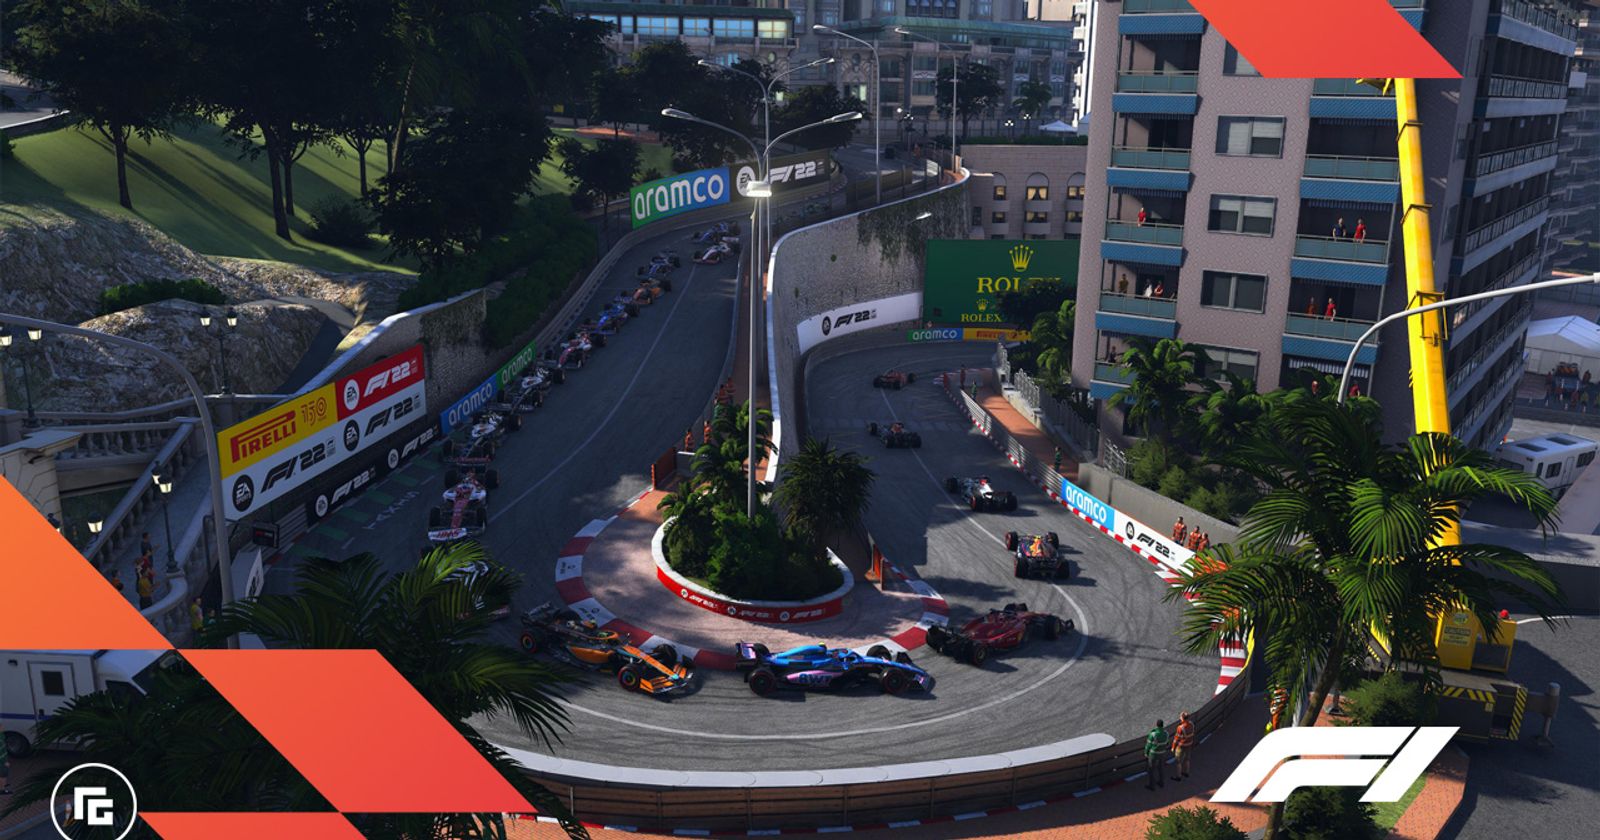 F1 Monaco Grand Prix 2023: How to watch in the US without cable